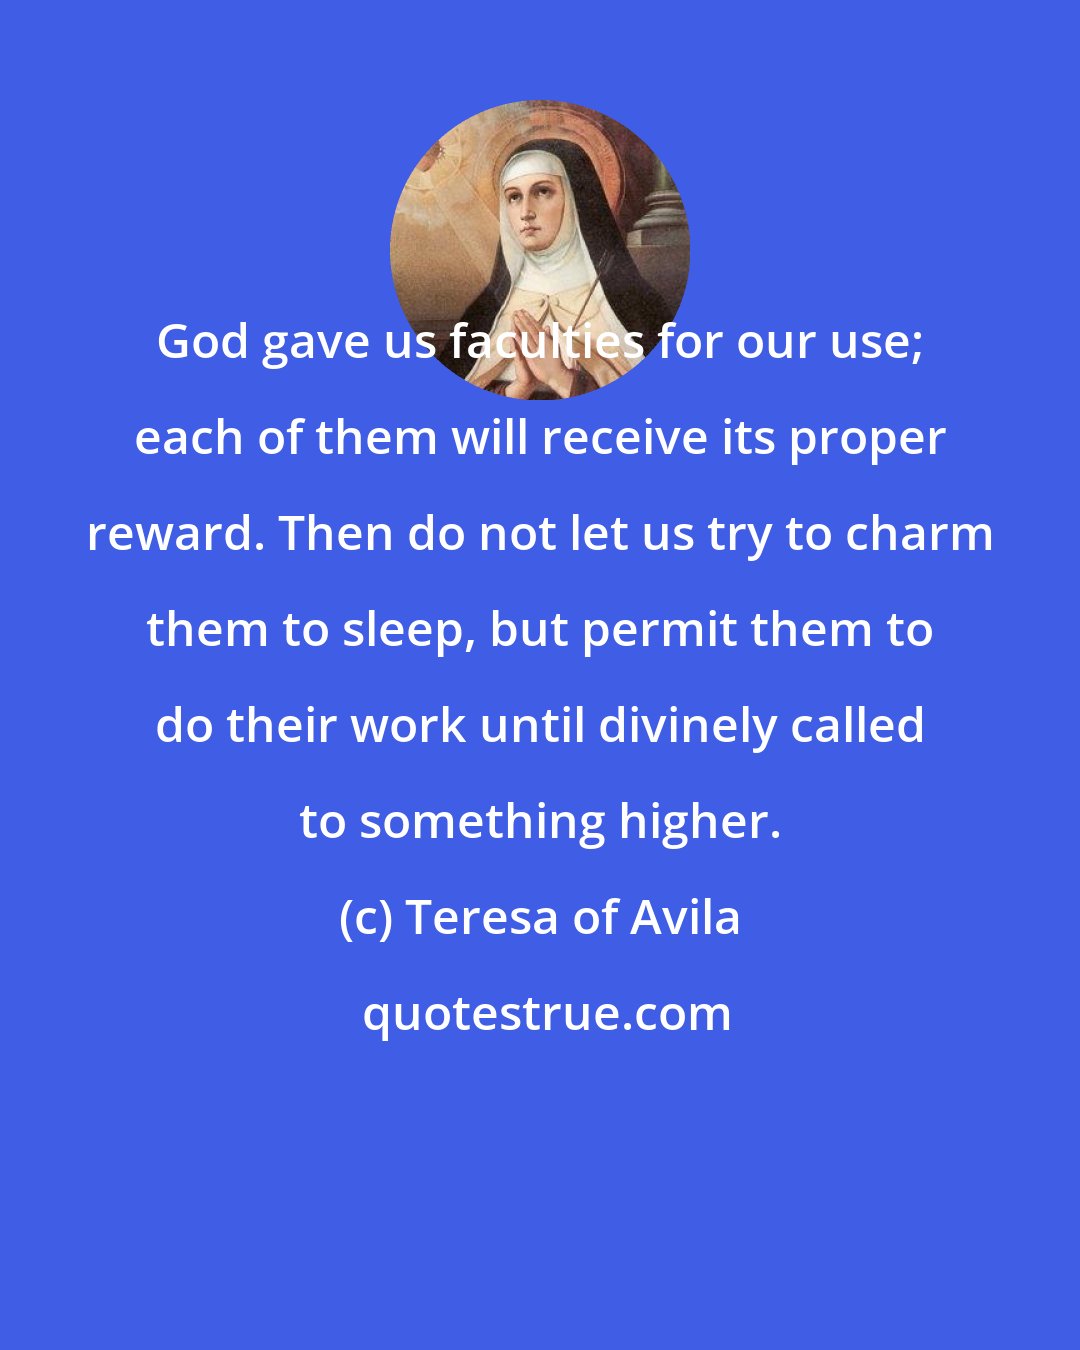 Teresa of Avila: God gave us faculties for our use; each of them will receive its proper reward. Then do not let us try to charm them to sleep, but permit them to do their work until divinely called to something higher.